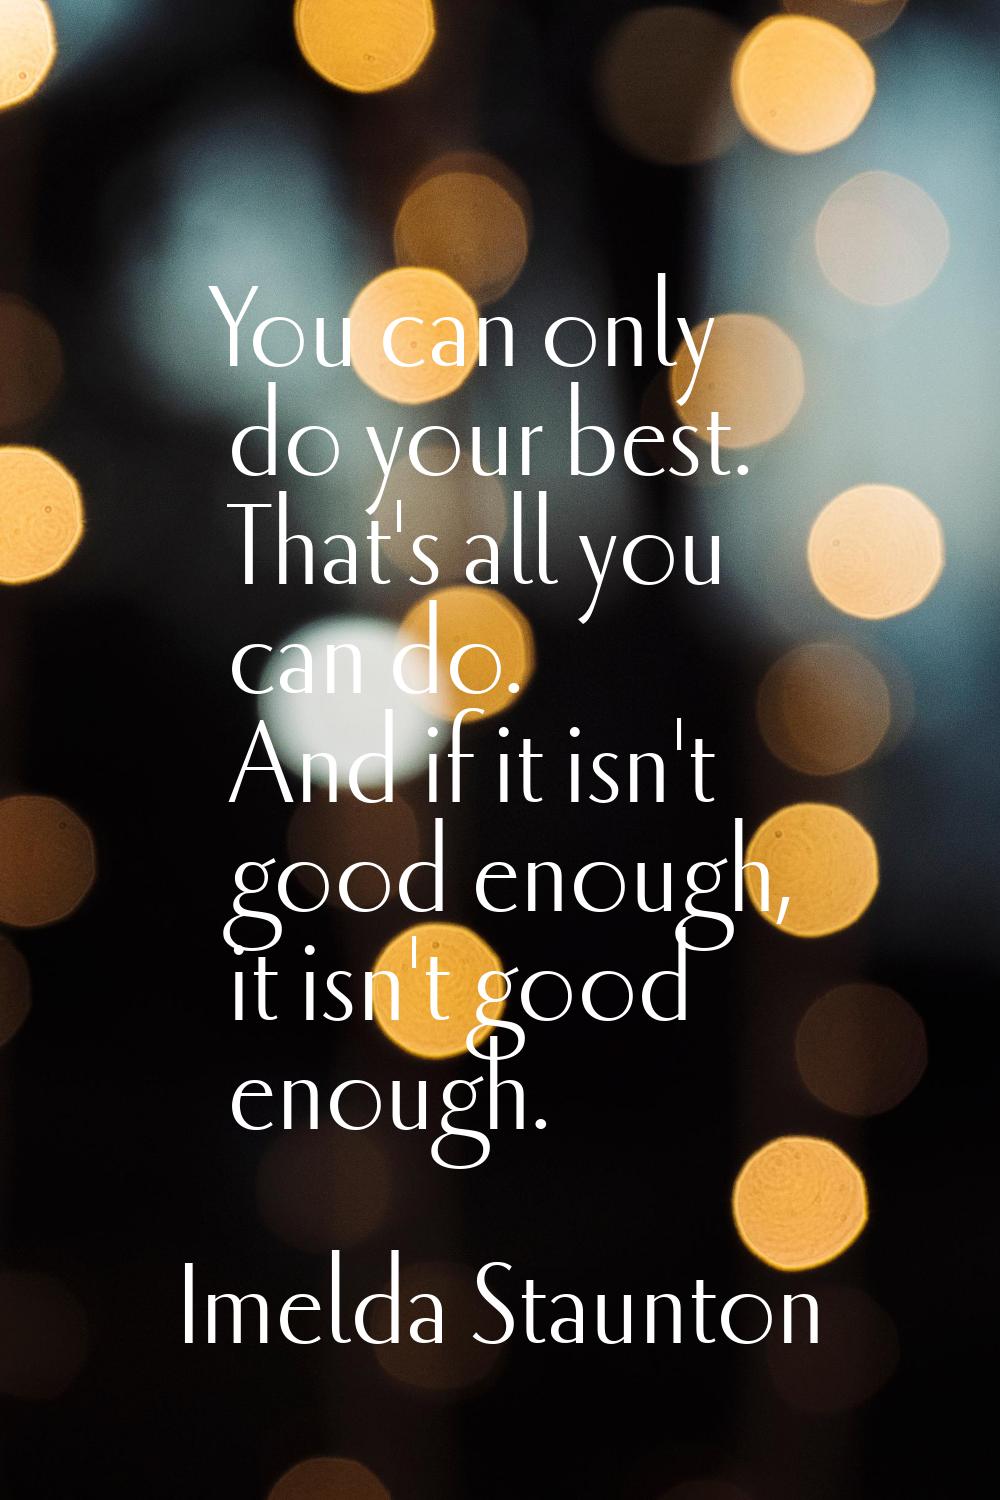 You can only do your best. That's all you can do. And if it isn't good enough, it isn't good enough